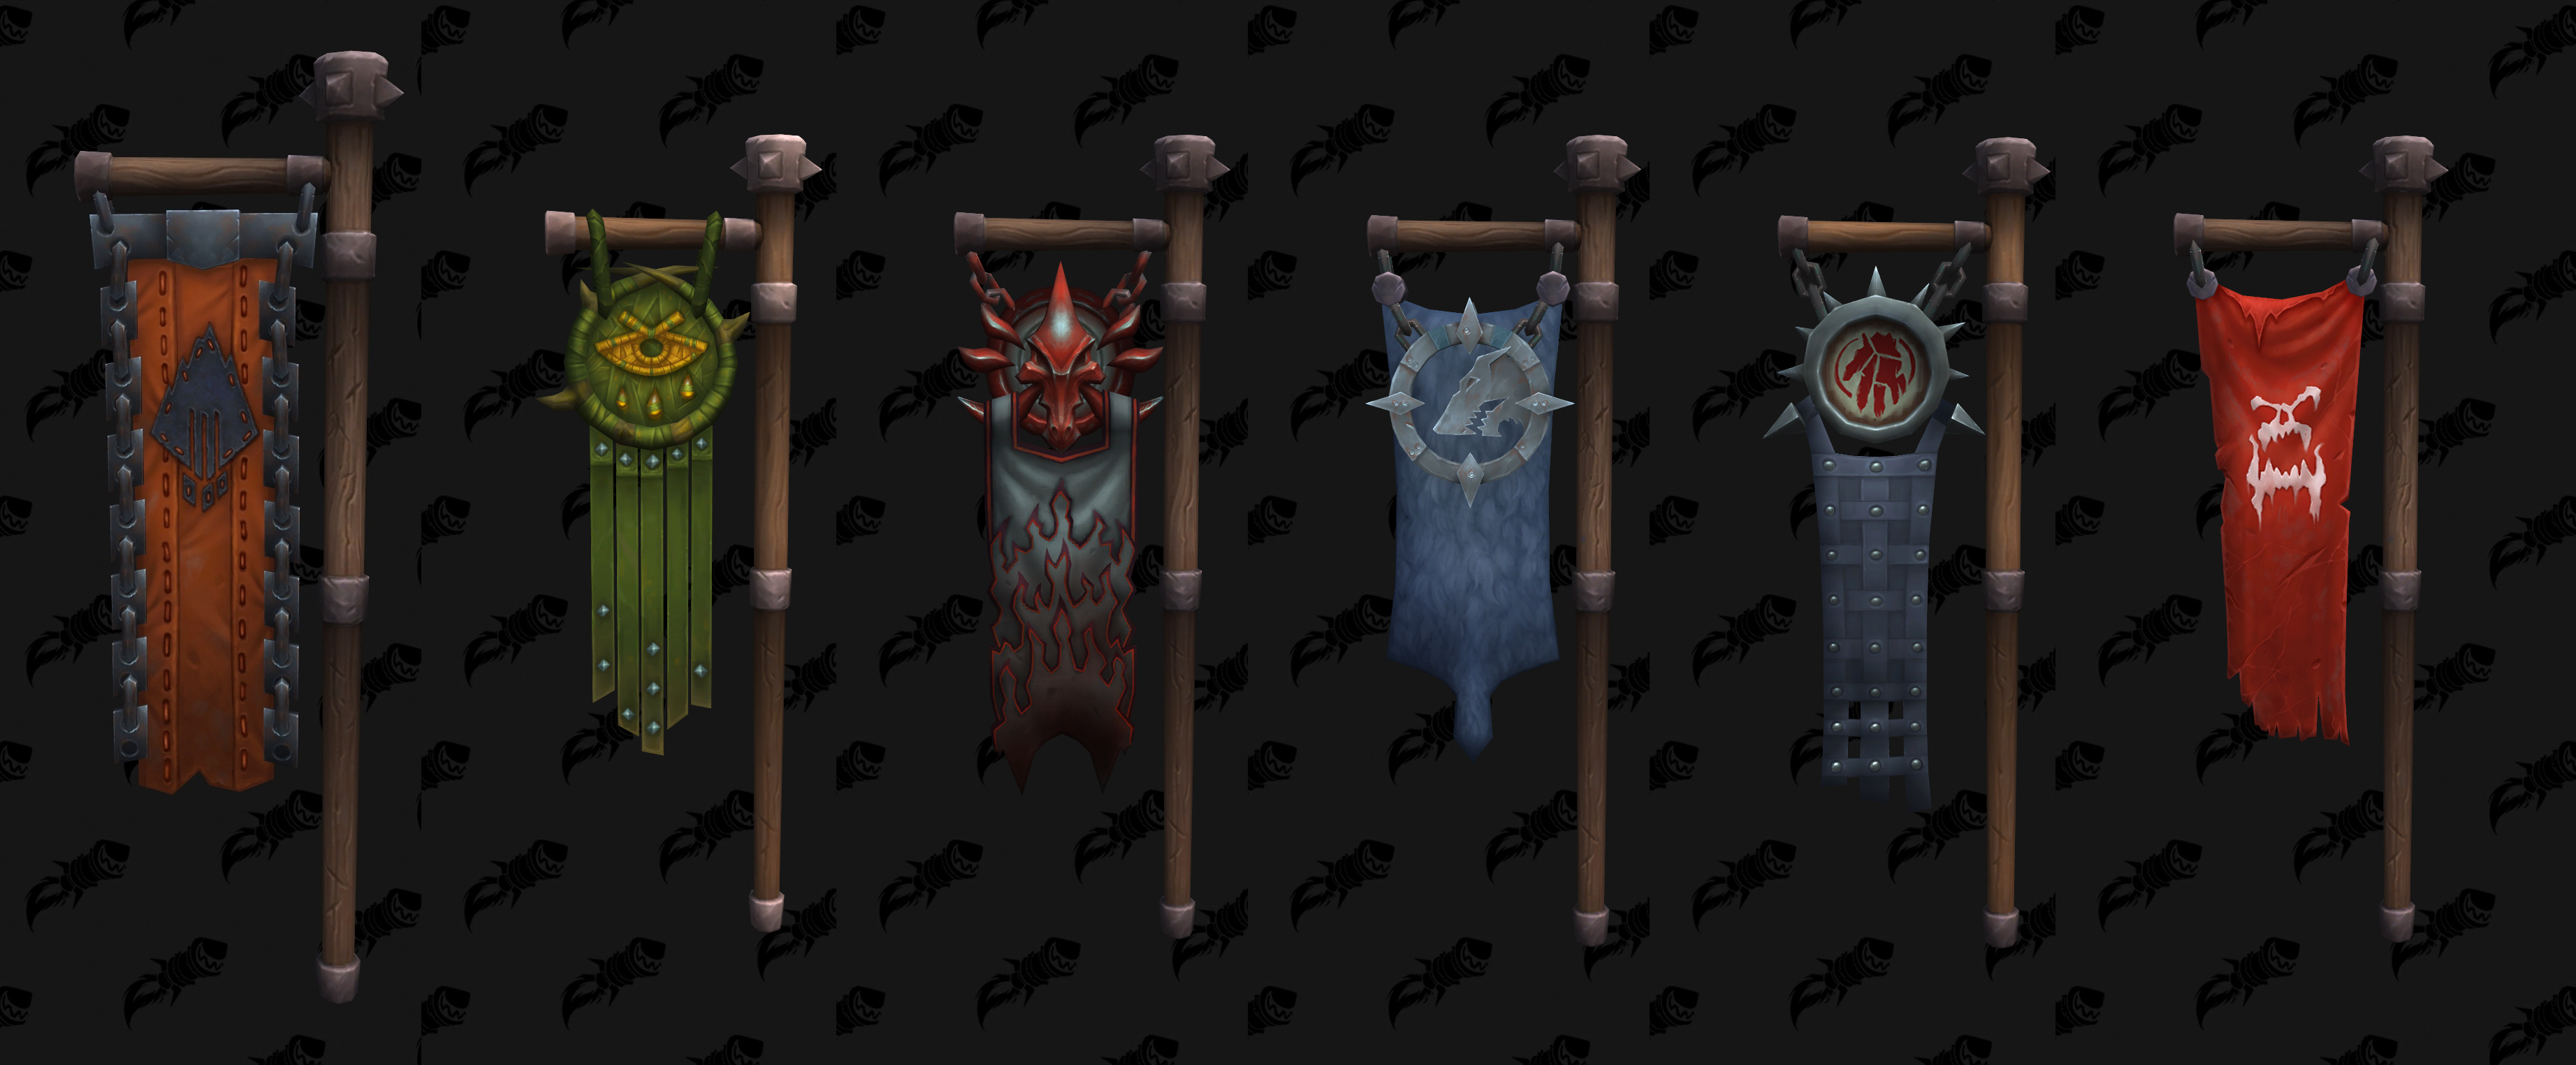 New Datamined Orc Clan Banners in Patch 10.0.7 - Possible Orc Heritage  Questline Rewards? - Wowhead News